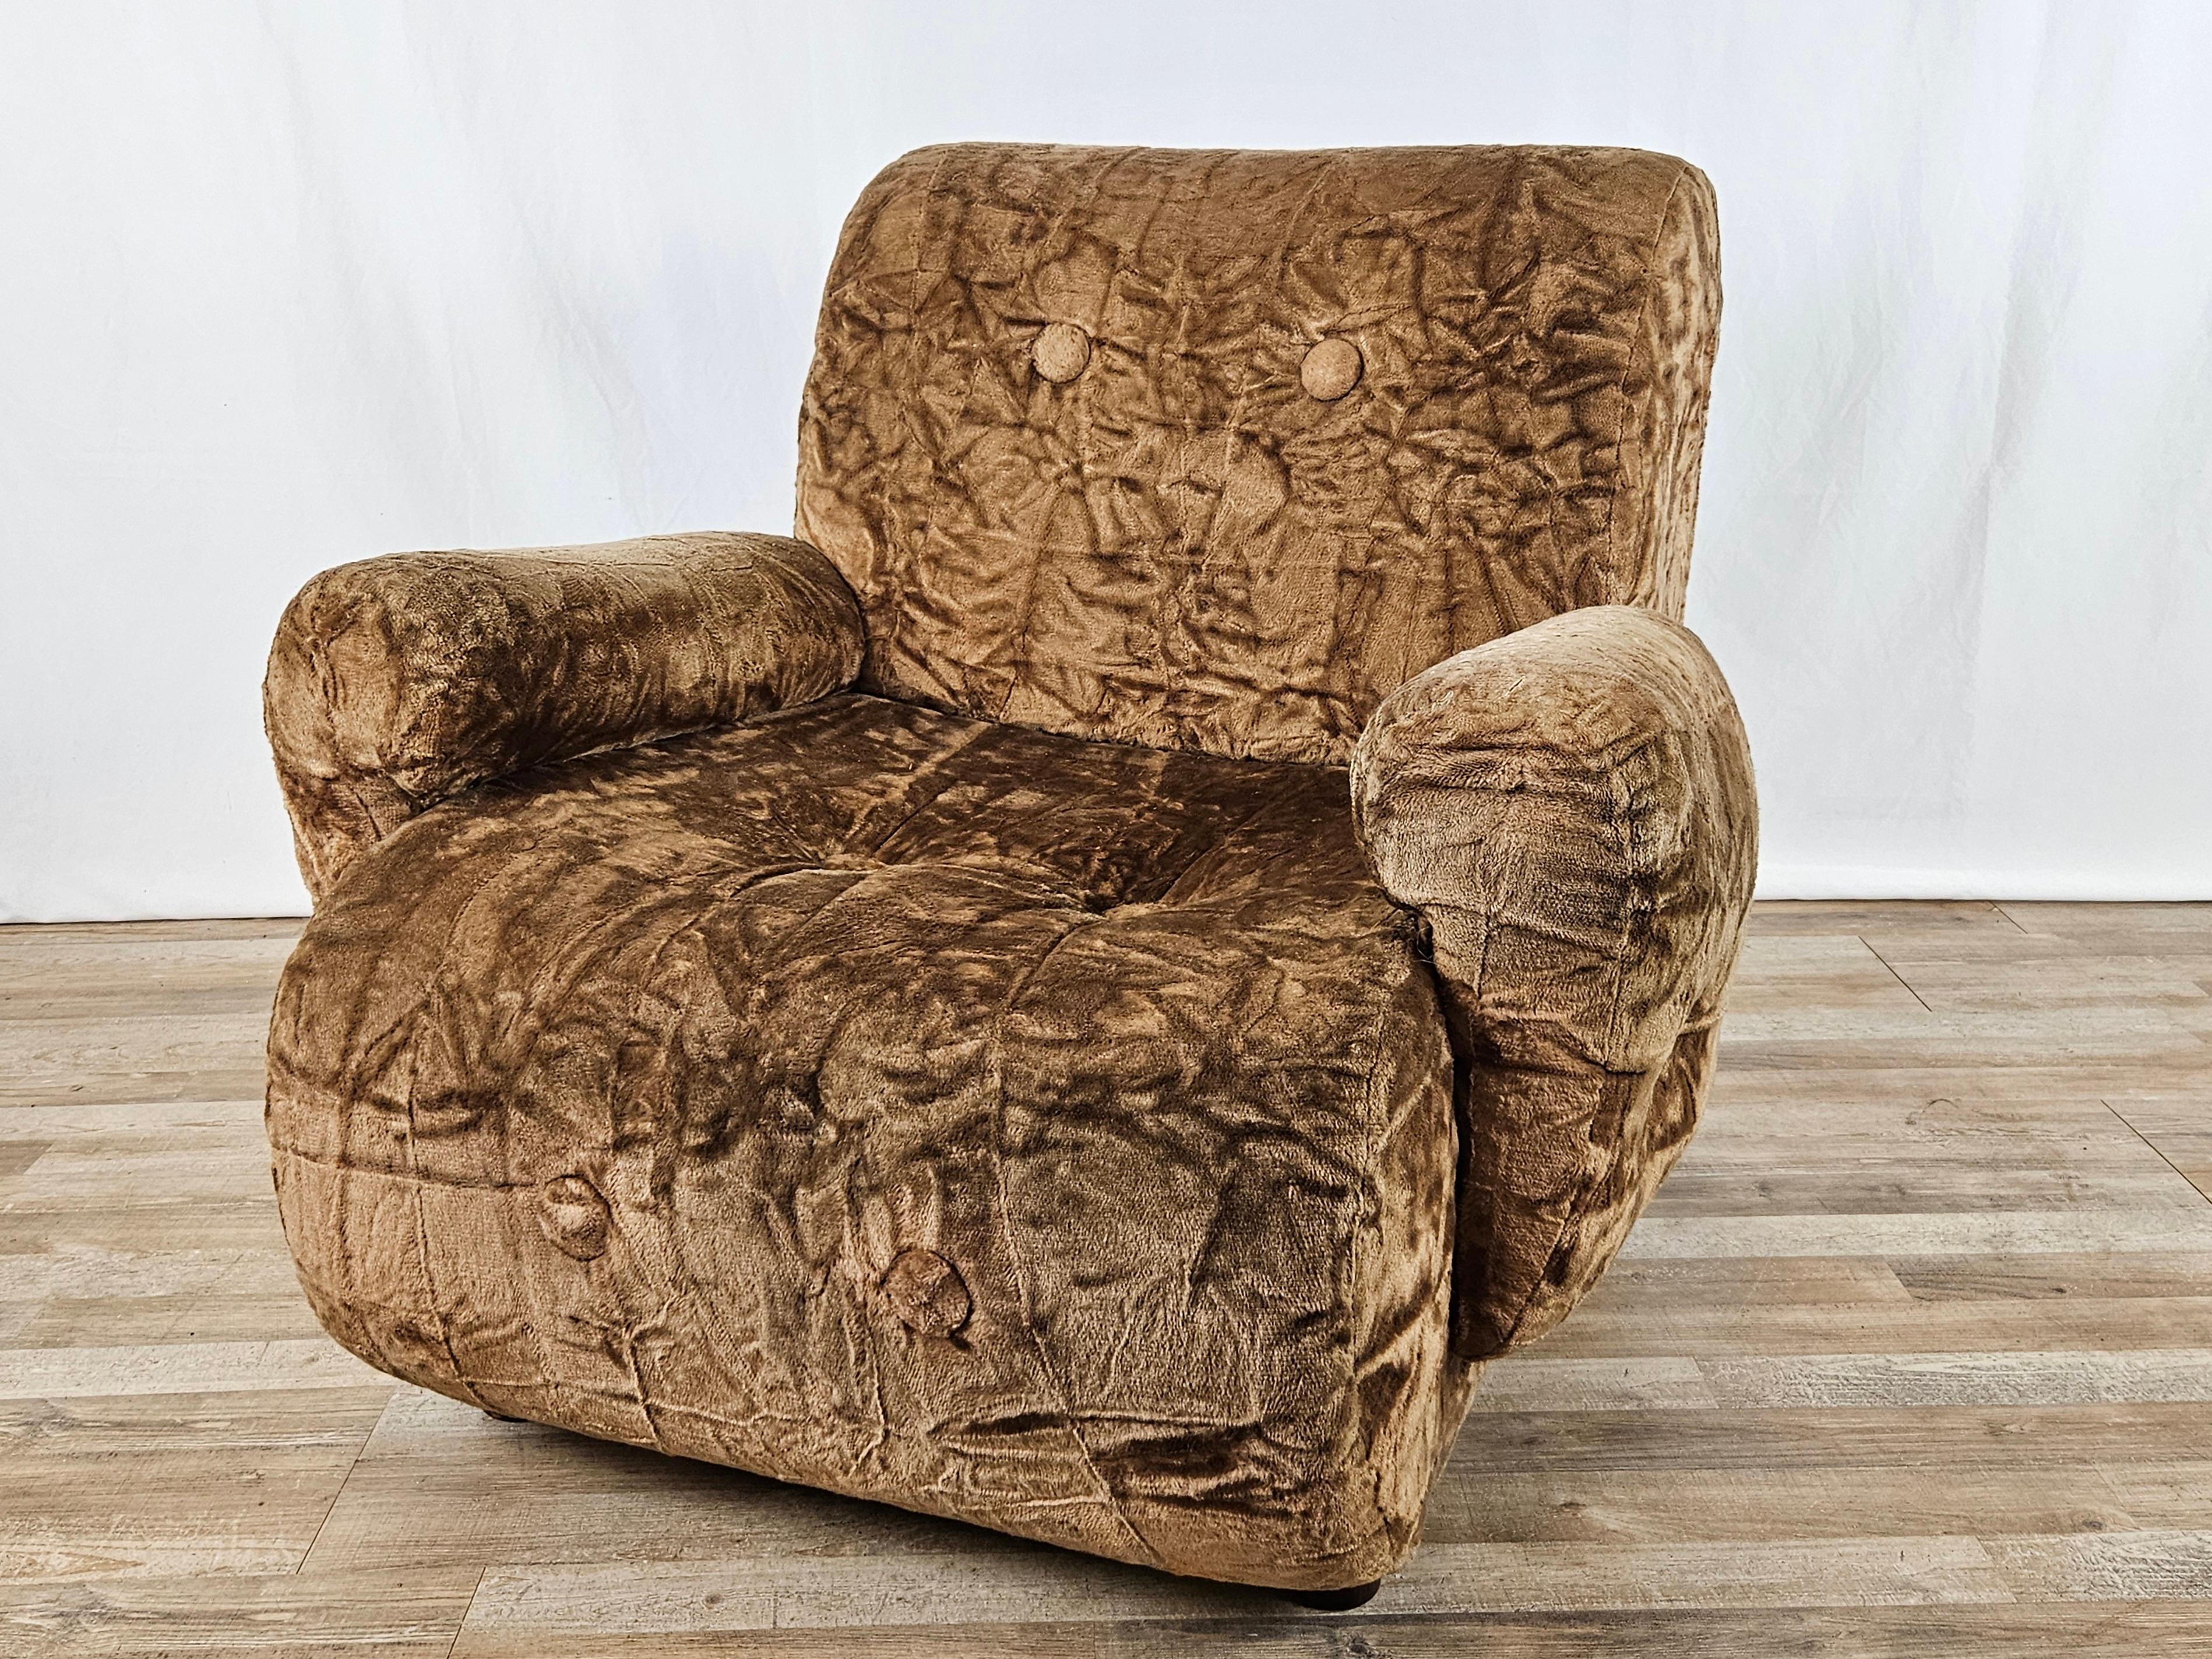 Vintage 1970s armchair upholstered in original vintage brown chenille, very comfortable and versatile in use due to the modern line is ideal for all kinds of environment.

Normal signs of wear due to age and use.
The cloth under the seat has a tear